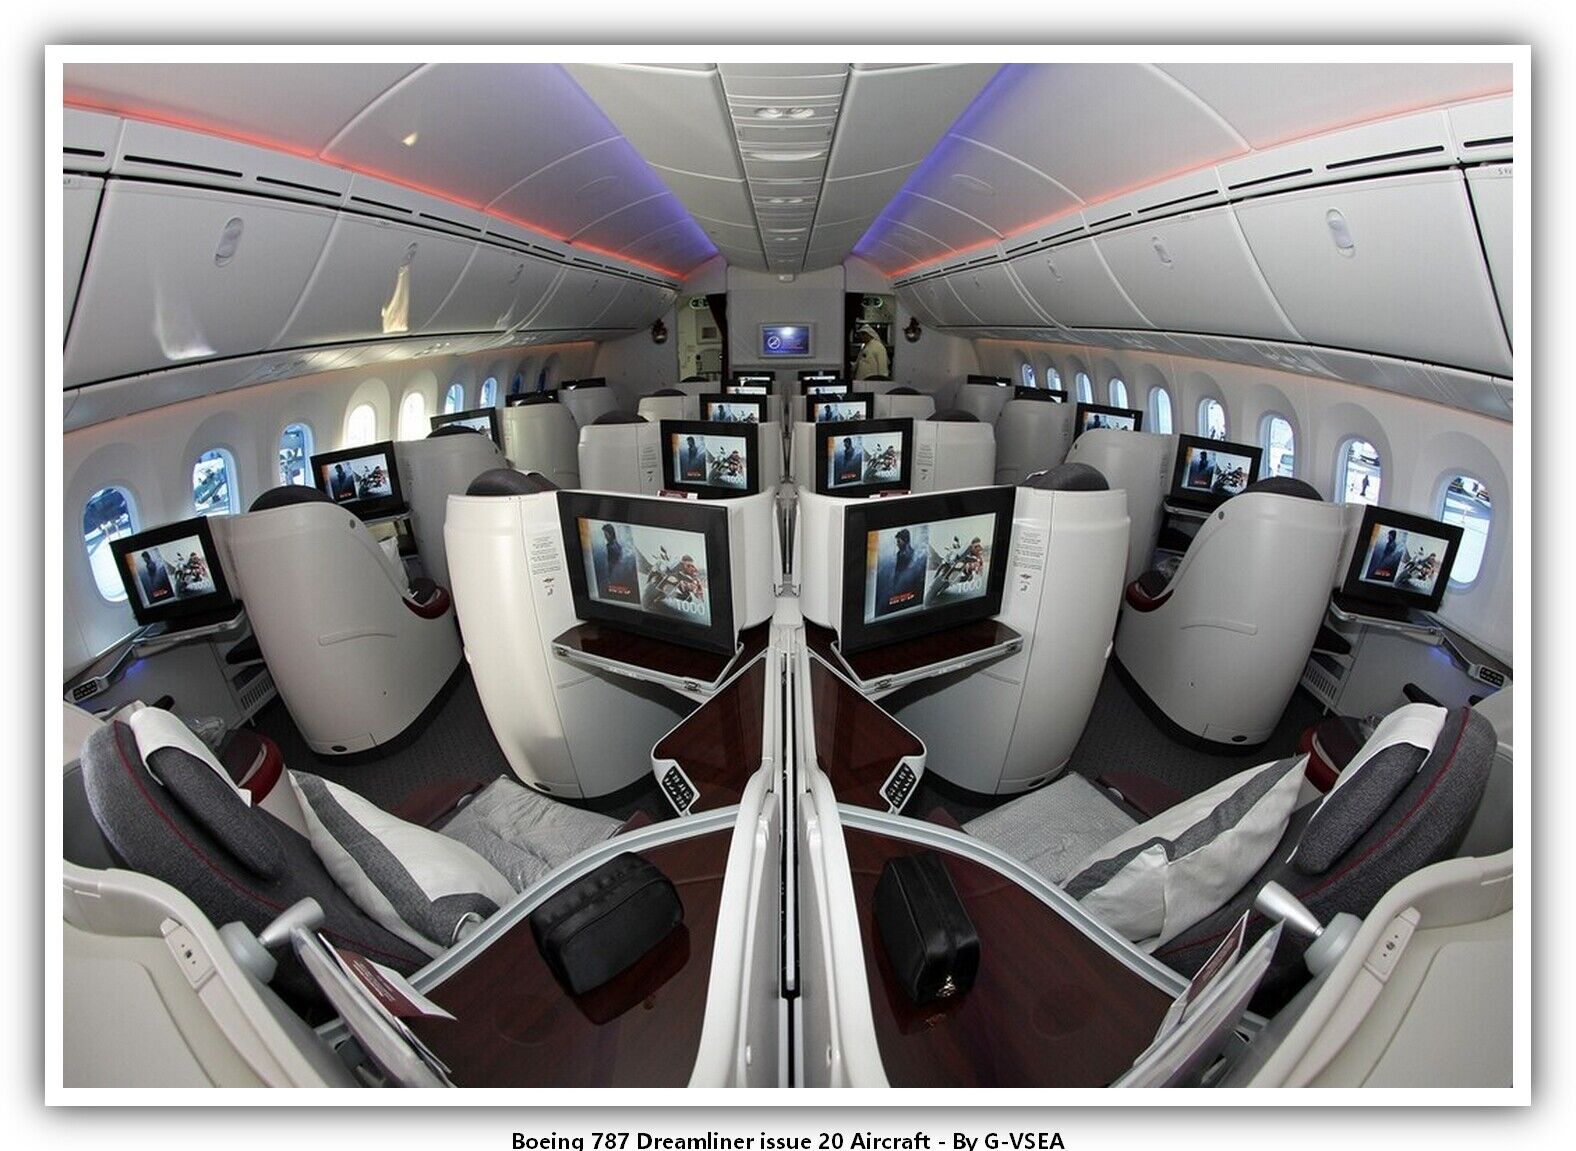 Boeing 787 Dreamliner issue 20 Aircraft